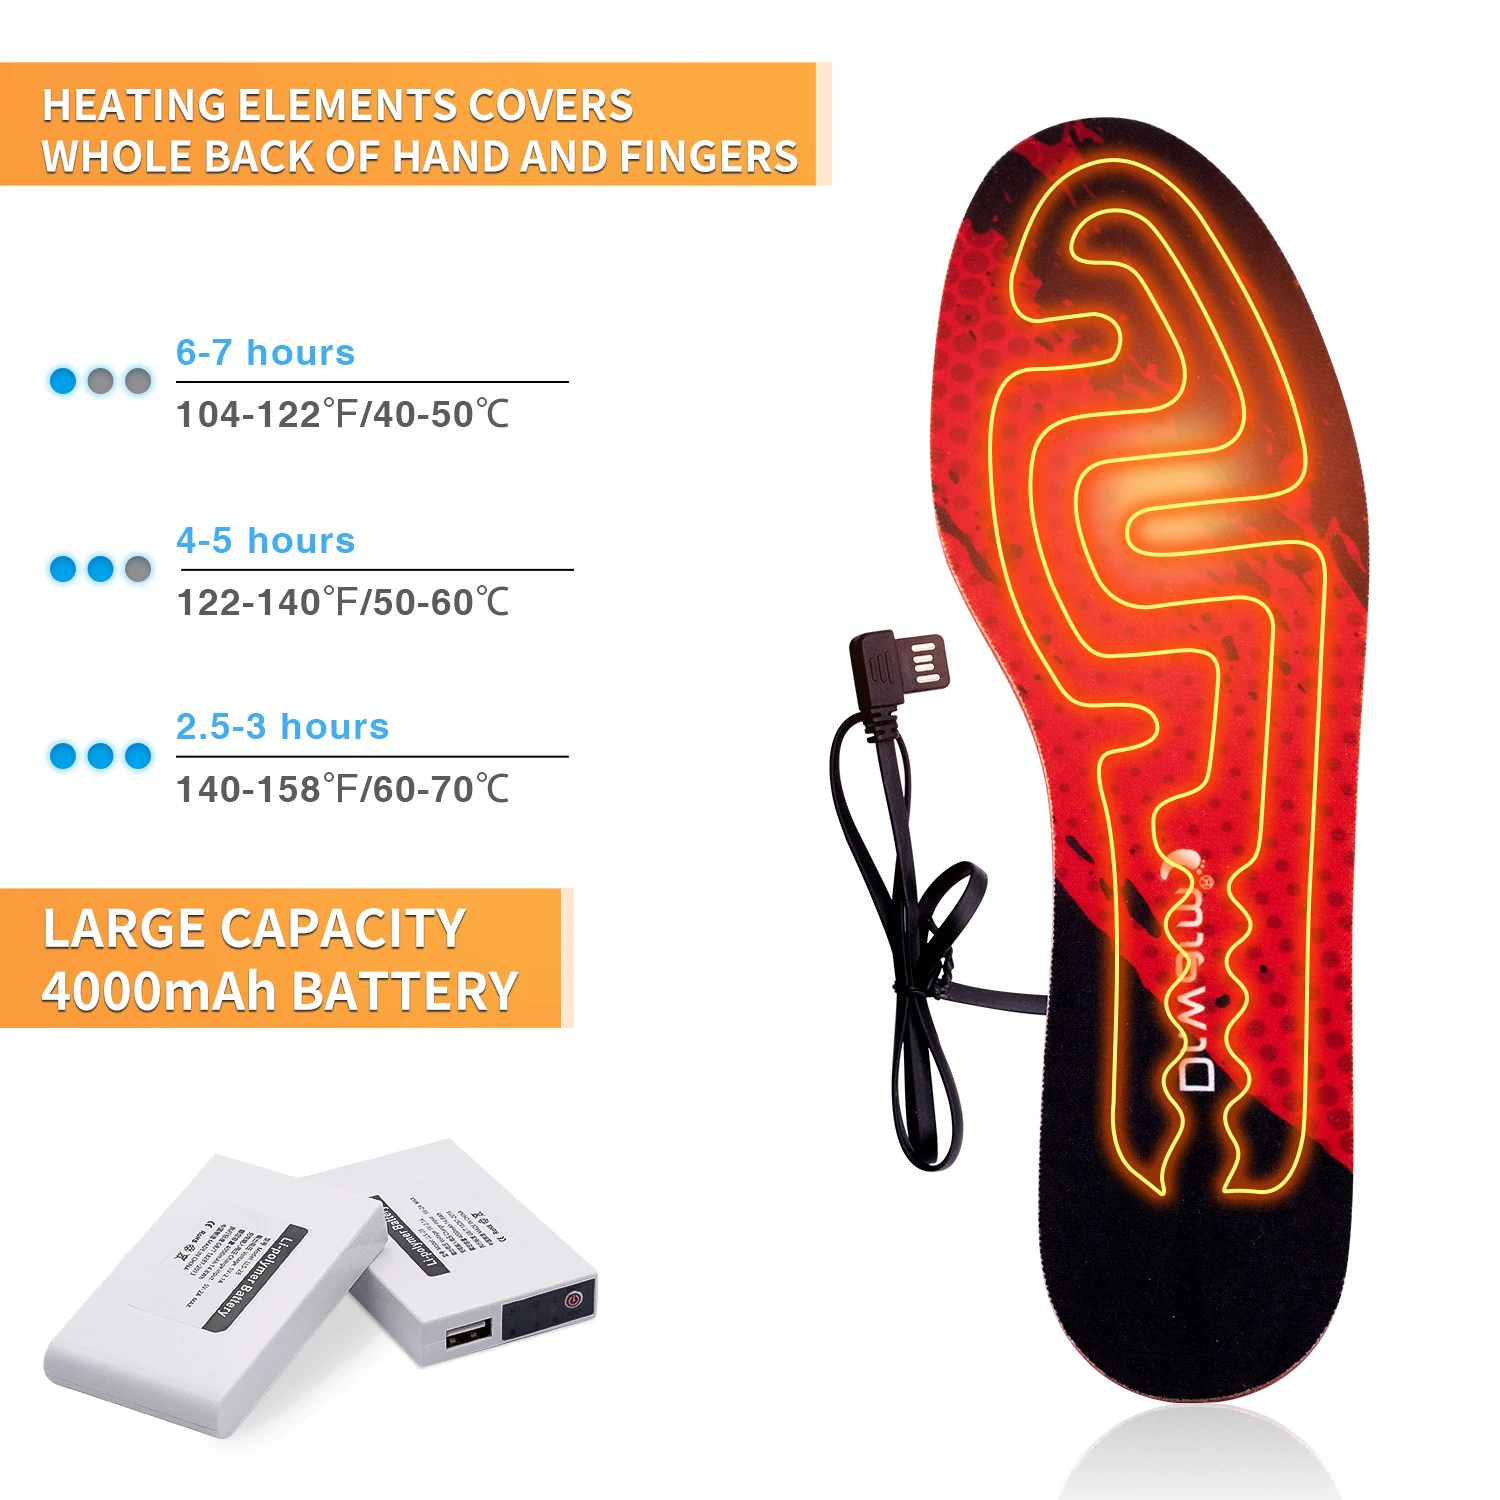 Dr. Warm rechargeable heated insoles for work boots fit to most shoes for indoor use